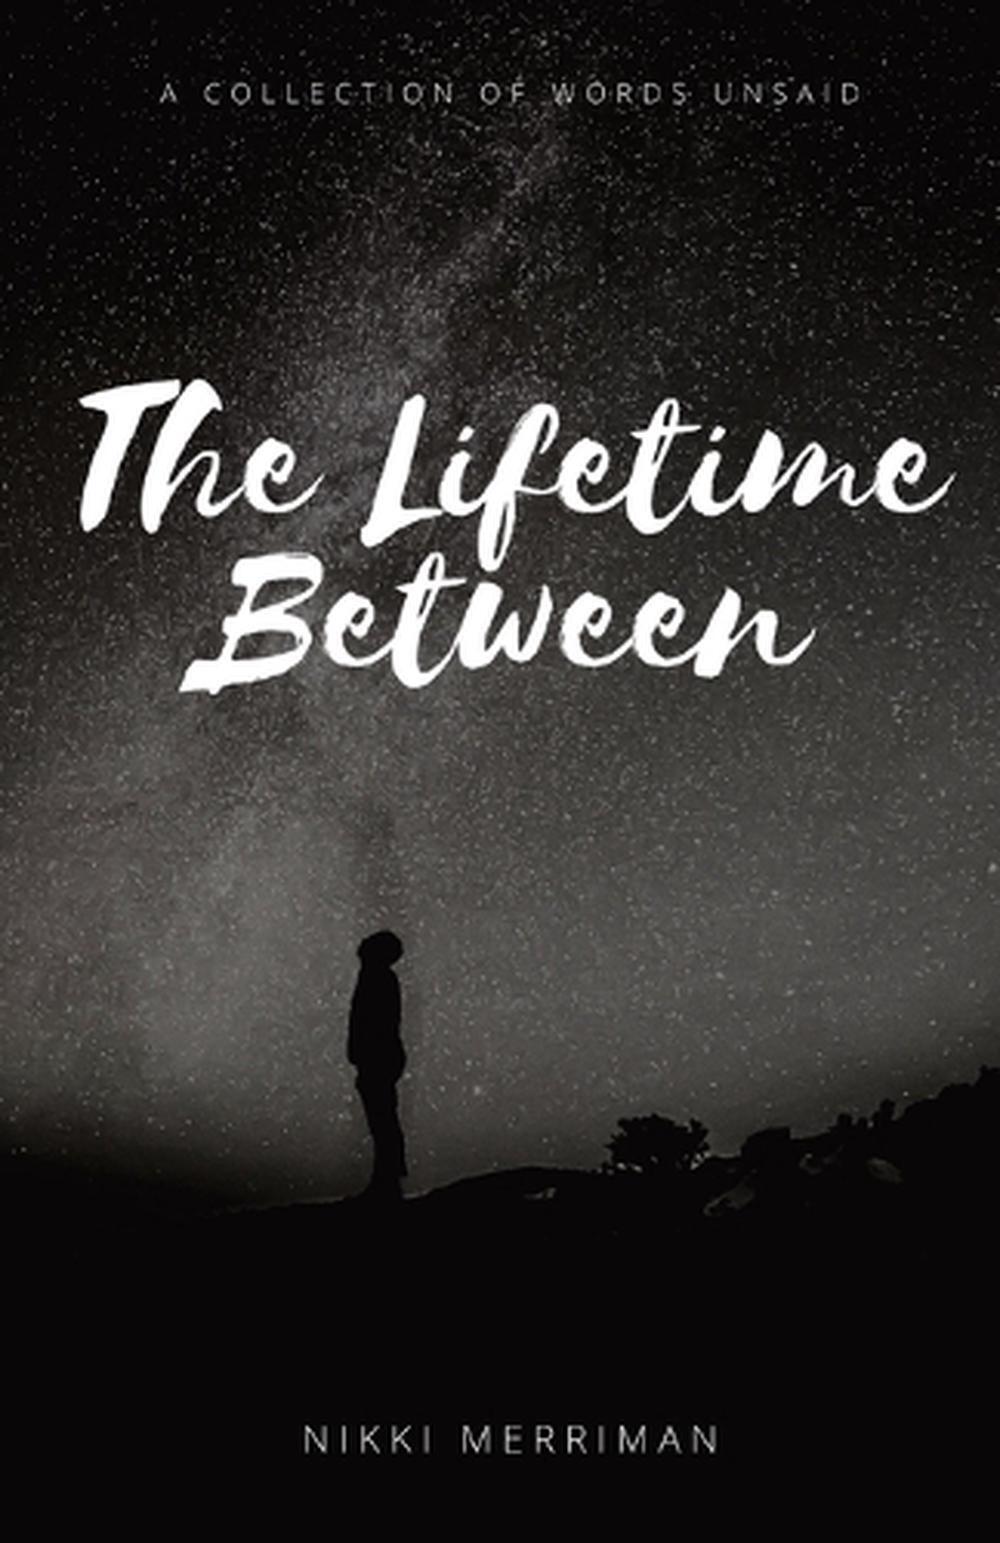 The Lifetime Between: A Collection of Words Unsaid by Nikki Merriman (English) P